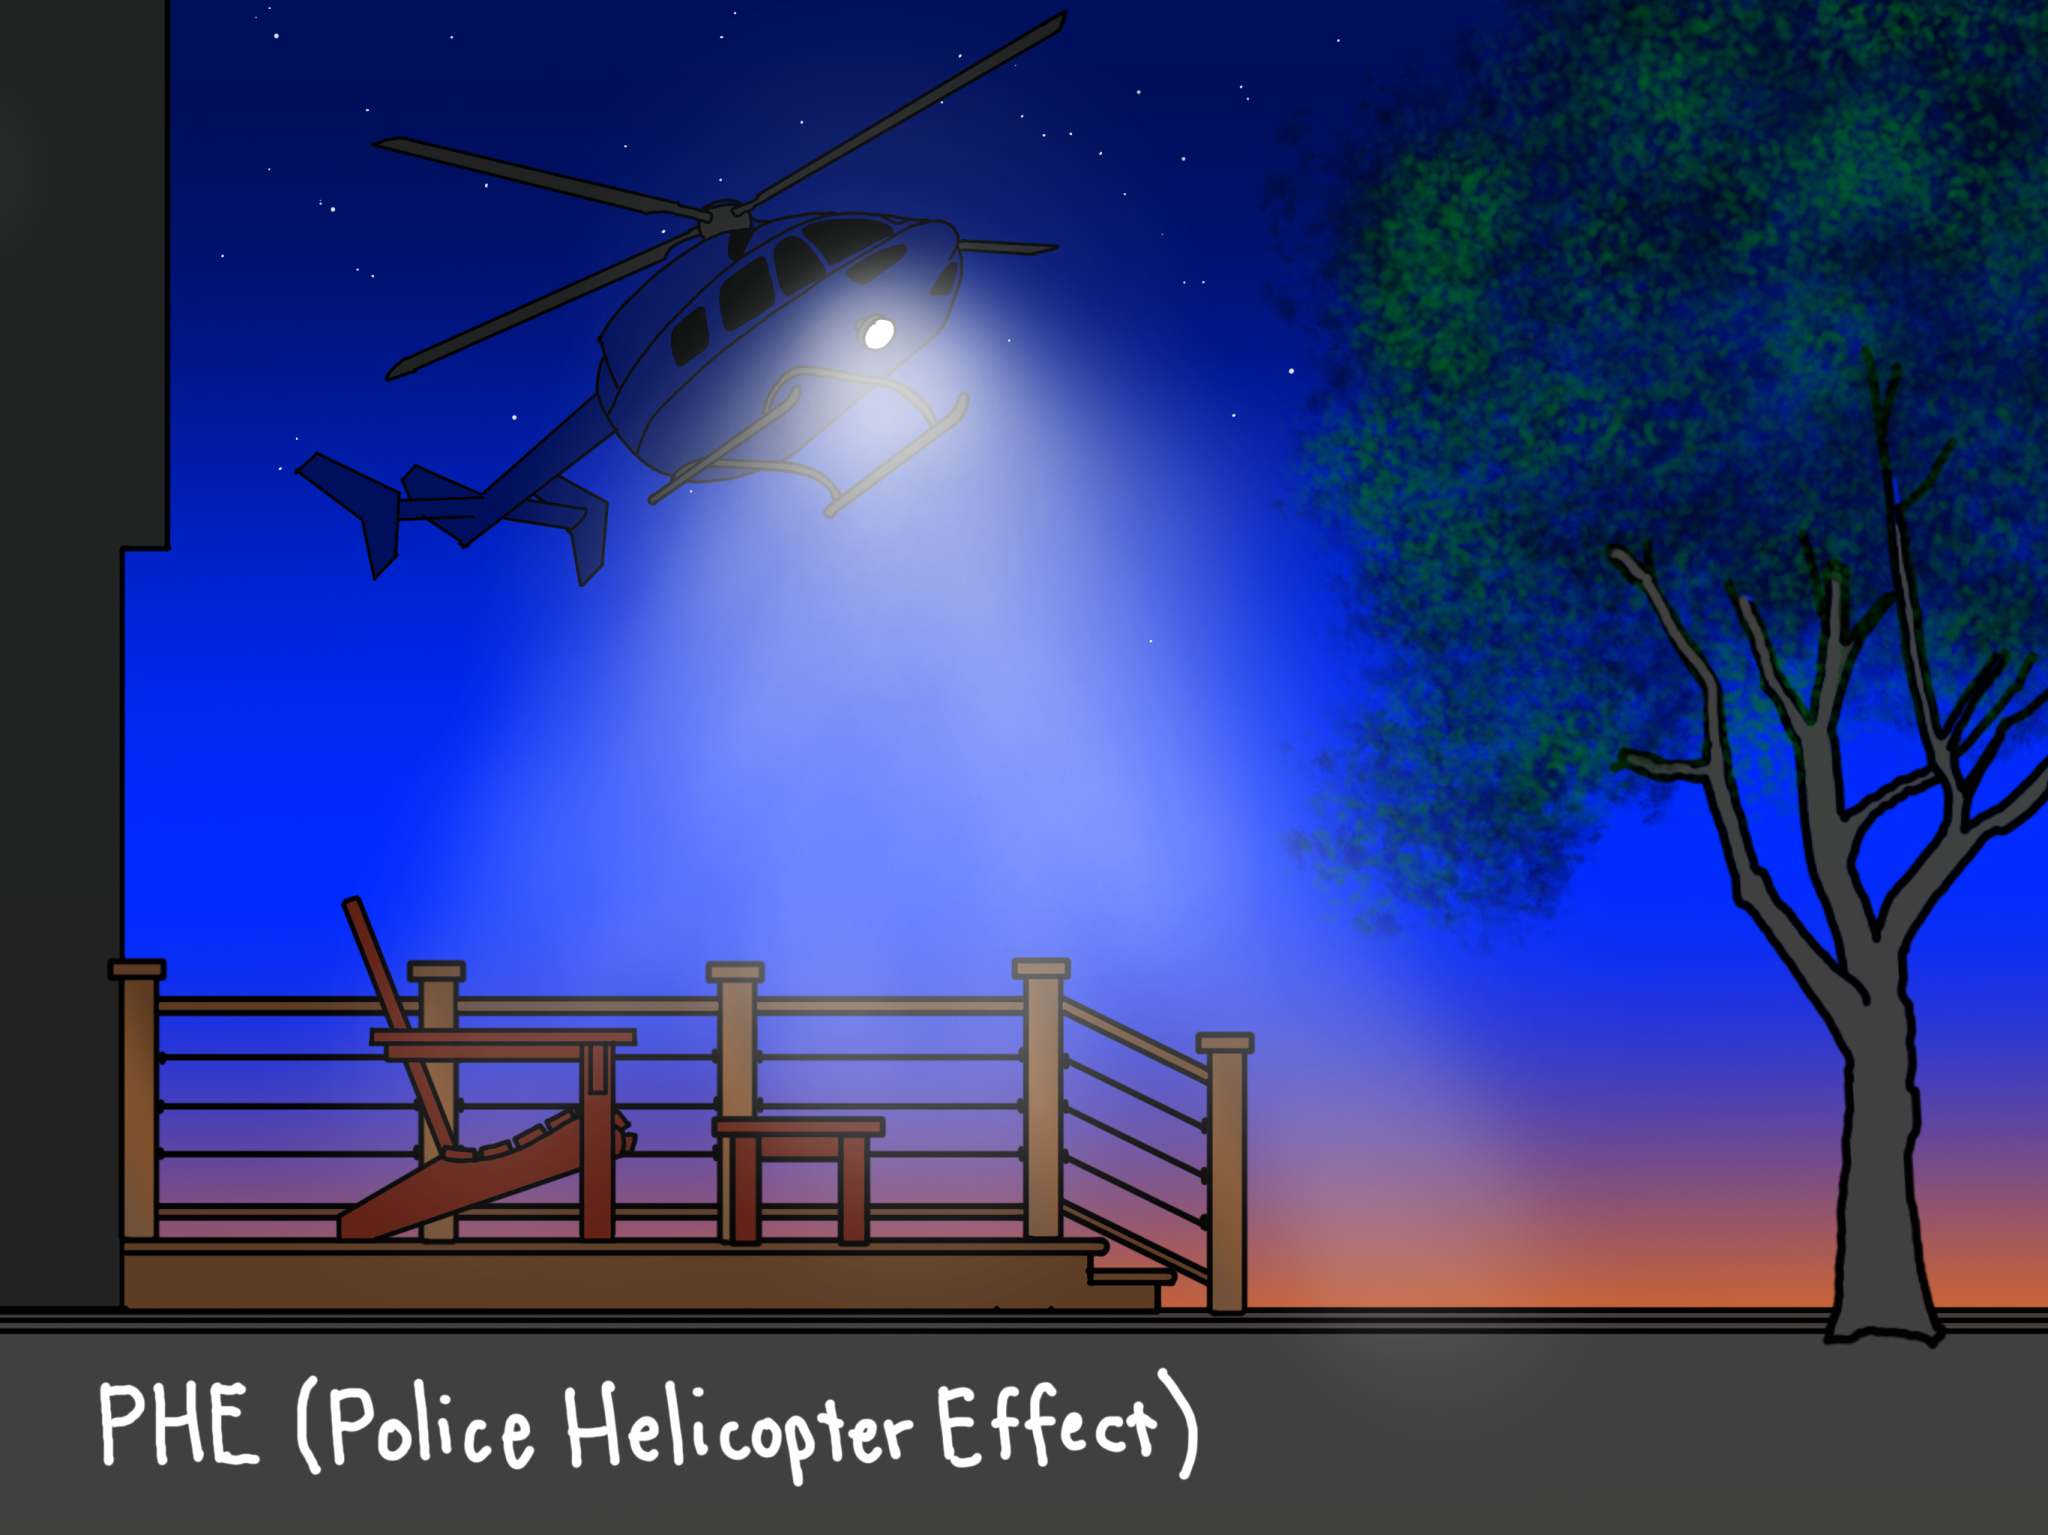 An illustration of a deck with a helicopter hovering above it shining a light down, labelled "PHE (Police Helicopter Effect)"